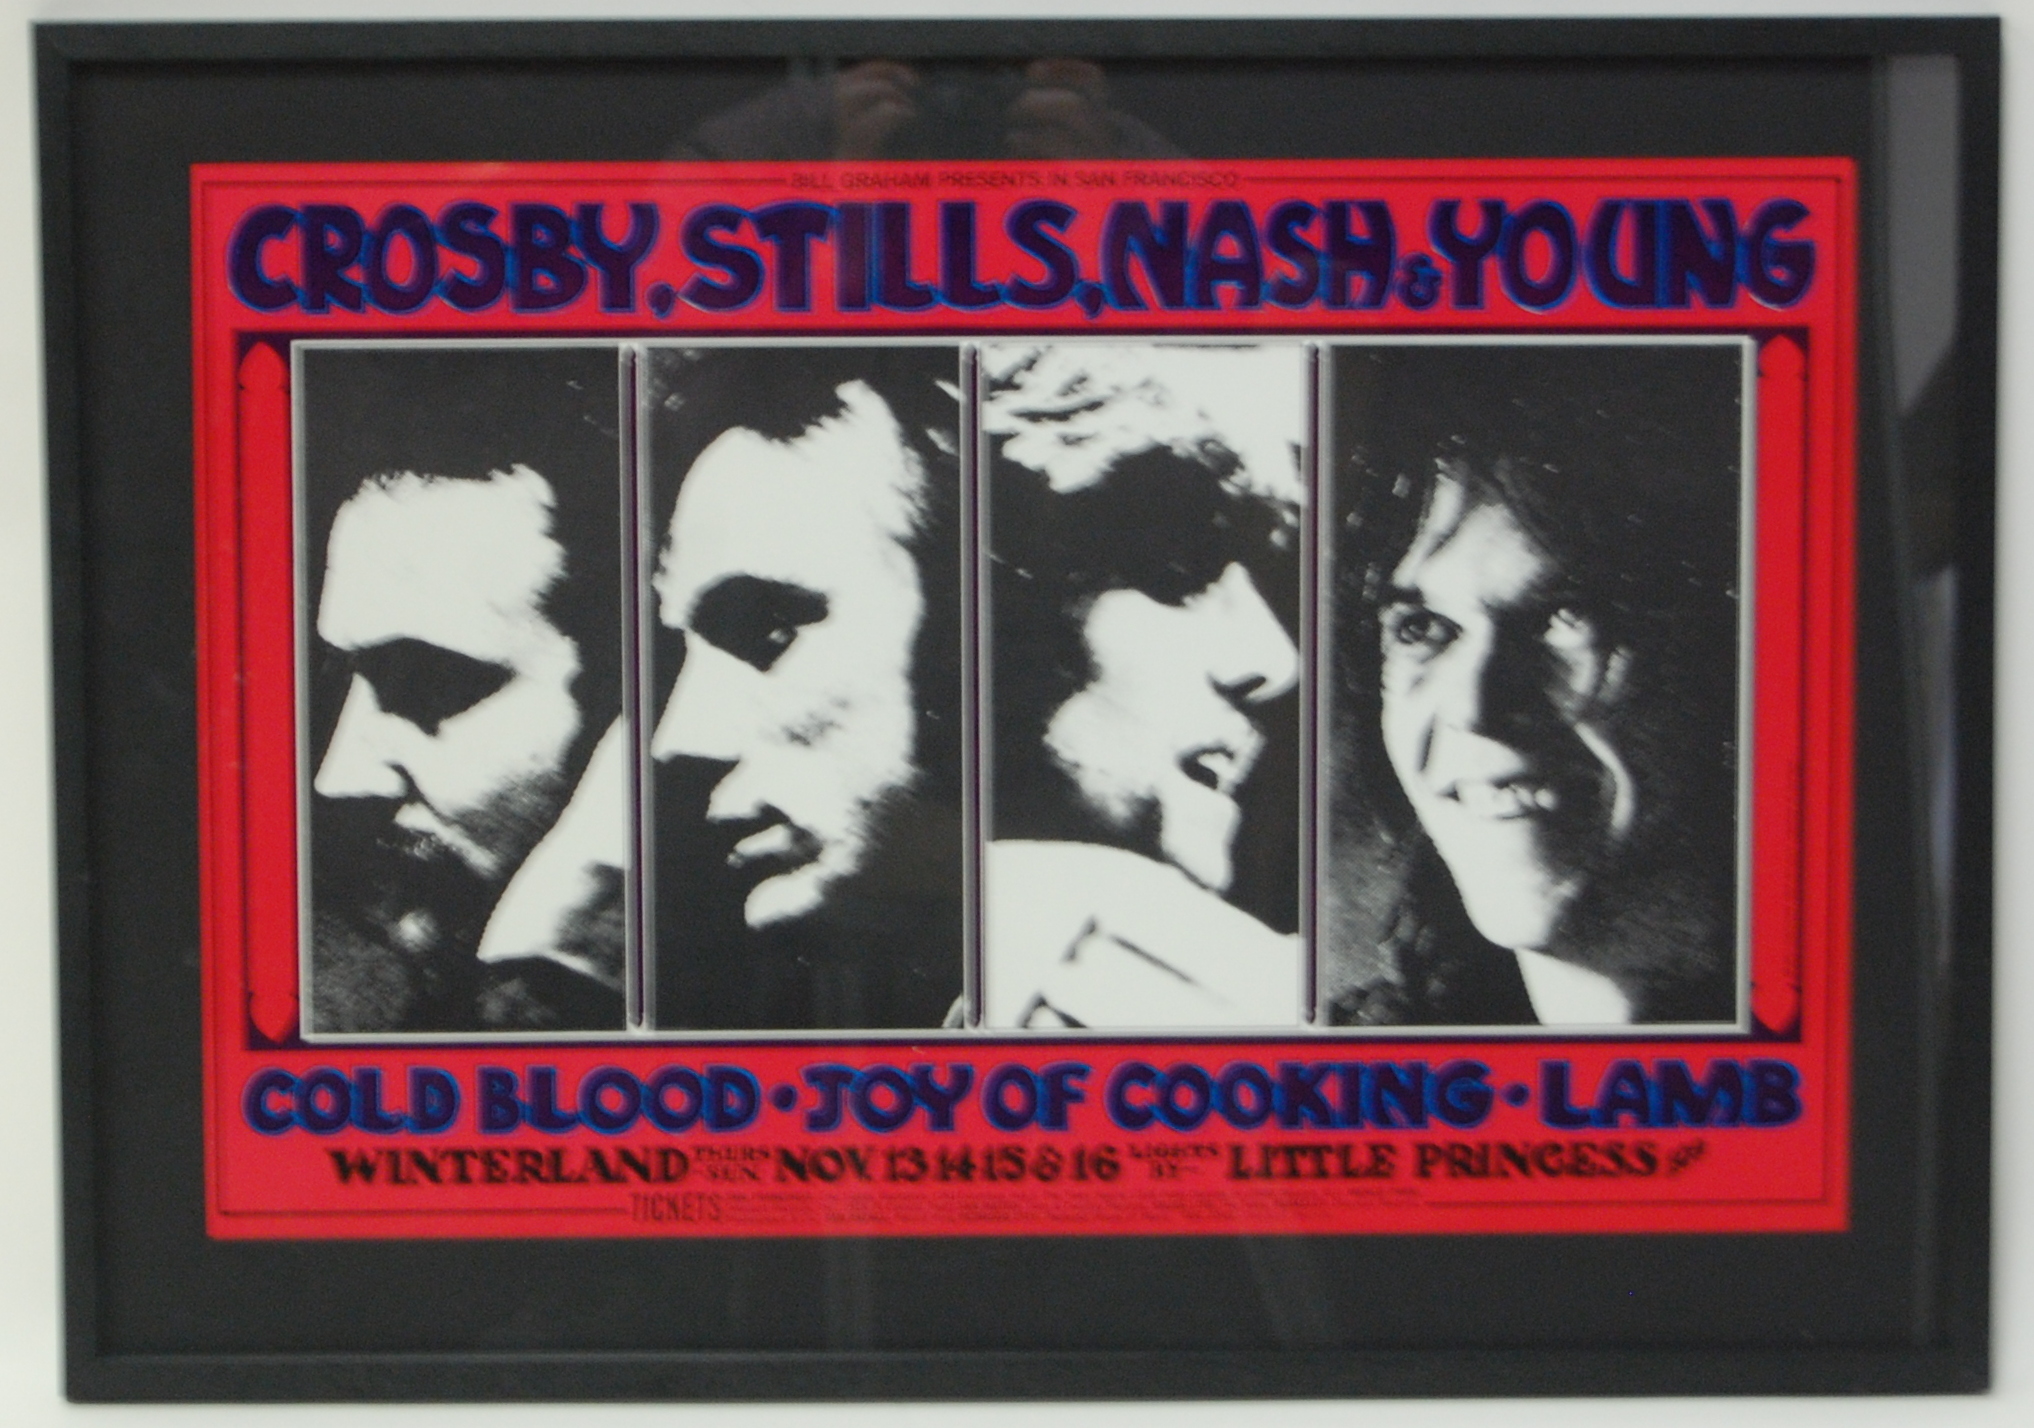 Crosby, Stills, Nash & Young, 1969 Cold Blood - Joy of Cooking promotional lithograph poster,